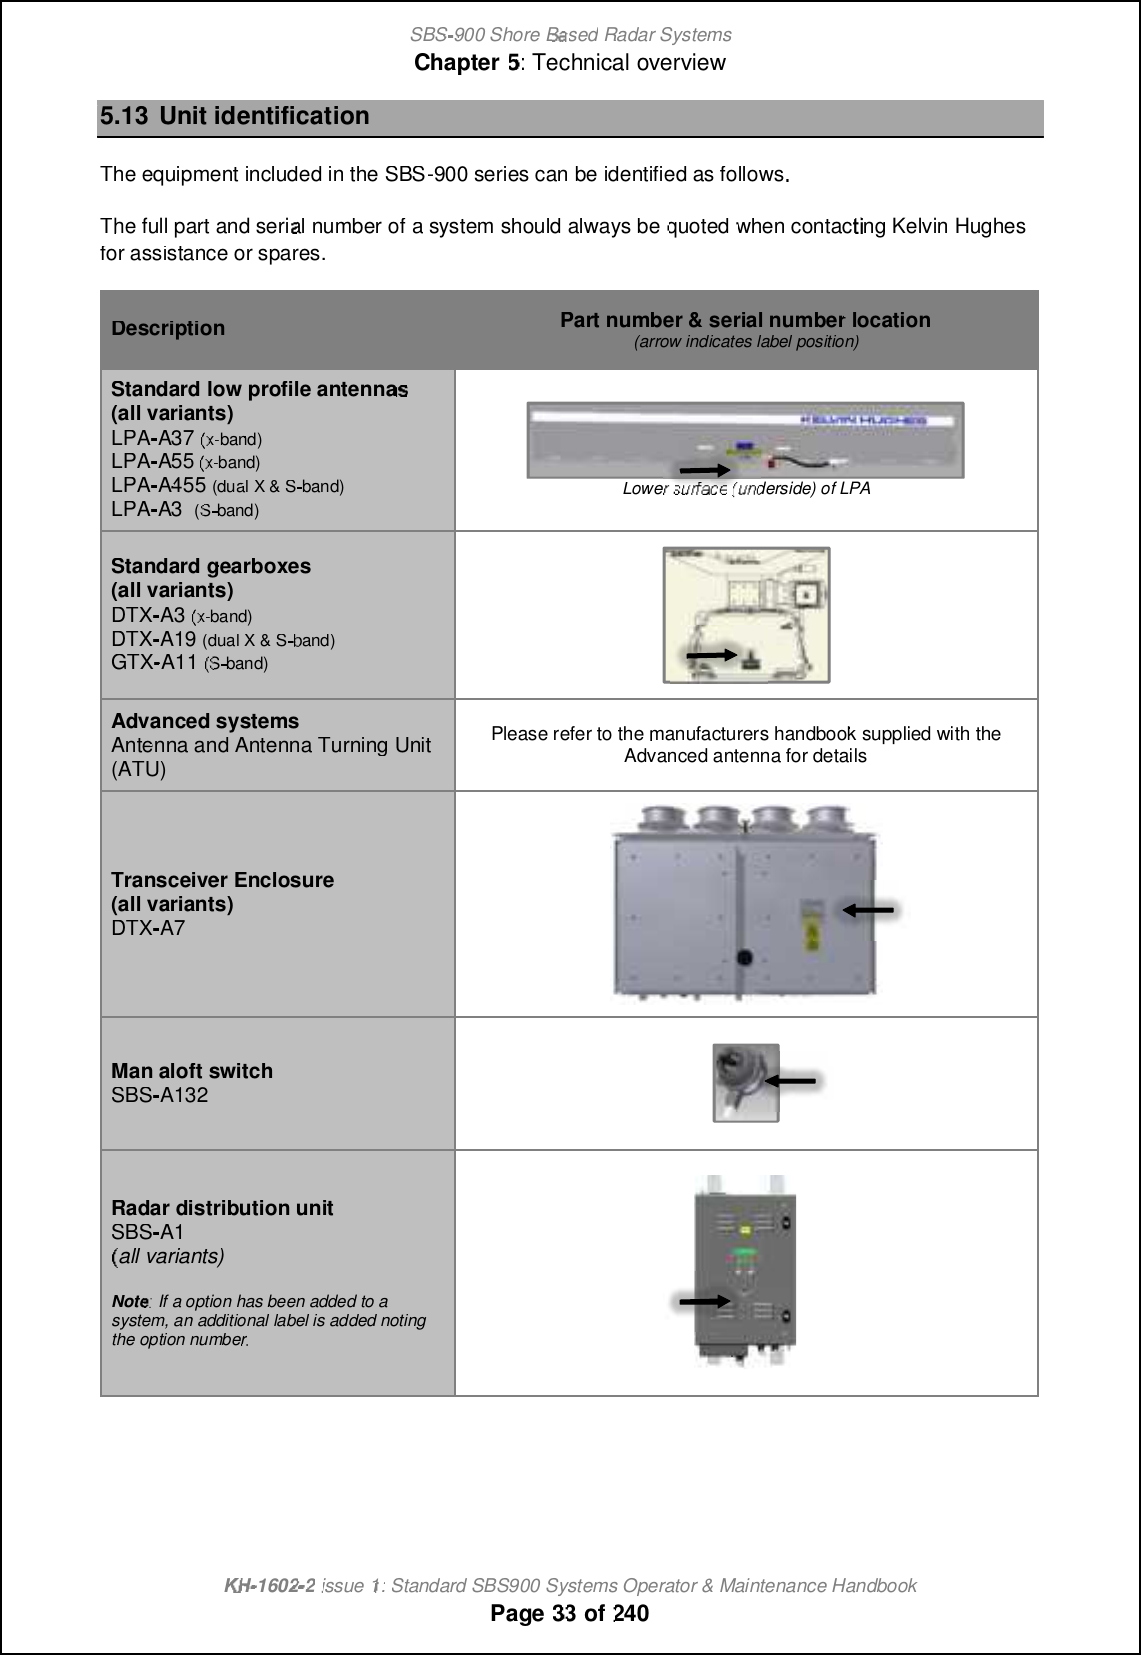 SBS-900 ShoreBaBasedRadar SystemsChapter5:Technical overviewKHKH-1602 2issue 1:Standard SBS900 Systems Operator &amp; Maintenance HandbookPage3333of2405.13Unit identificationThe equipment included in the SBS-900series can be identified as followsThe full part and serial number ofasystem should always bequotedwhen contacting Kelvin Hughesfor assistance or spares.DescriptionPart number &amp; serial number location(arrow indicates label position)Standardlow profile antennas(all variants)LPAA37(x(x-band)LPAA55(x(x-band)LPAA455(dual X &amp; S-band)LPAA3(S(Sband)Lowersurface(underside) of LPAStandard gearboxes(all variants)DTX-A3(x(x-band)DTX-A19(dual X &amp; Sband)GTX-A11(S(Sband)Advanced systemsAntenna and Antenna Turning Unit(ATU)Please refer to themanufacturershandbooksupplied with theAdvanced antenna for detailsTransceiver Enclosure(all variants)DTX-A7Man aloft switchSBS-A132Radar distribution unitSBS-A1(all variants)Note: If a option has been added to asystem, an additional label is added notingthe option number